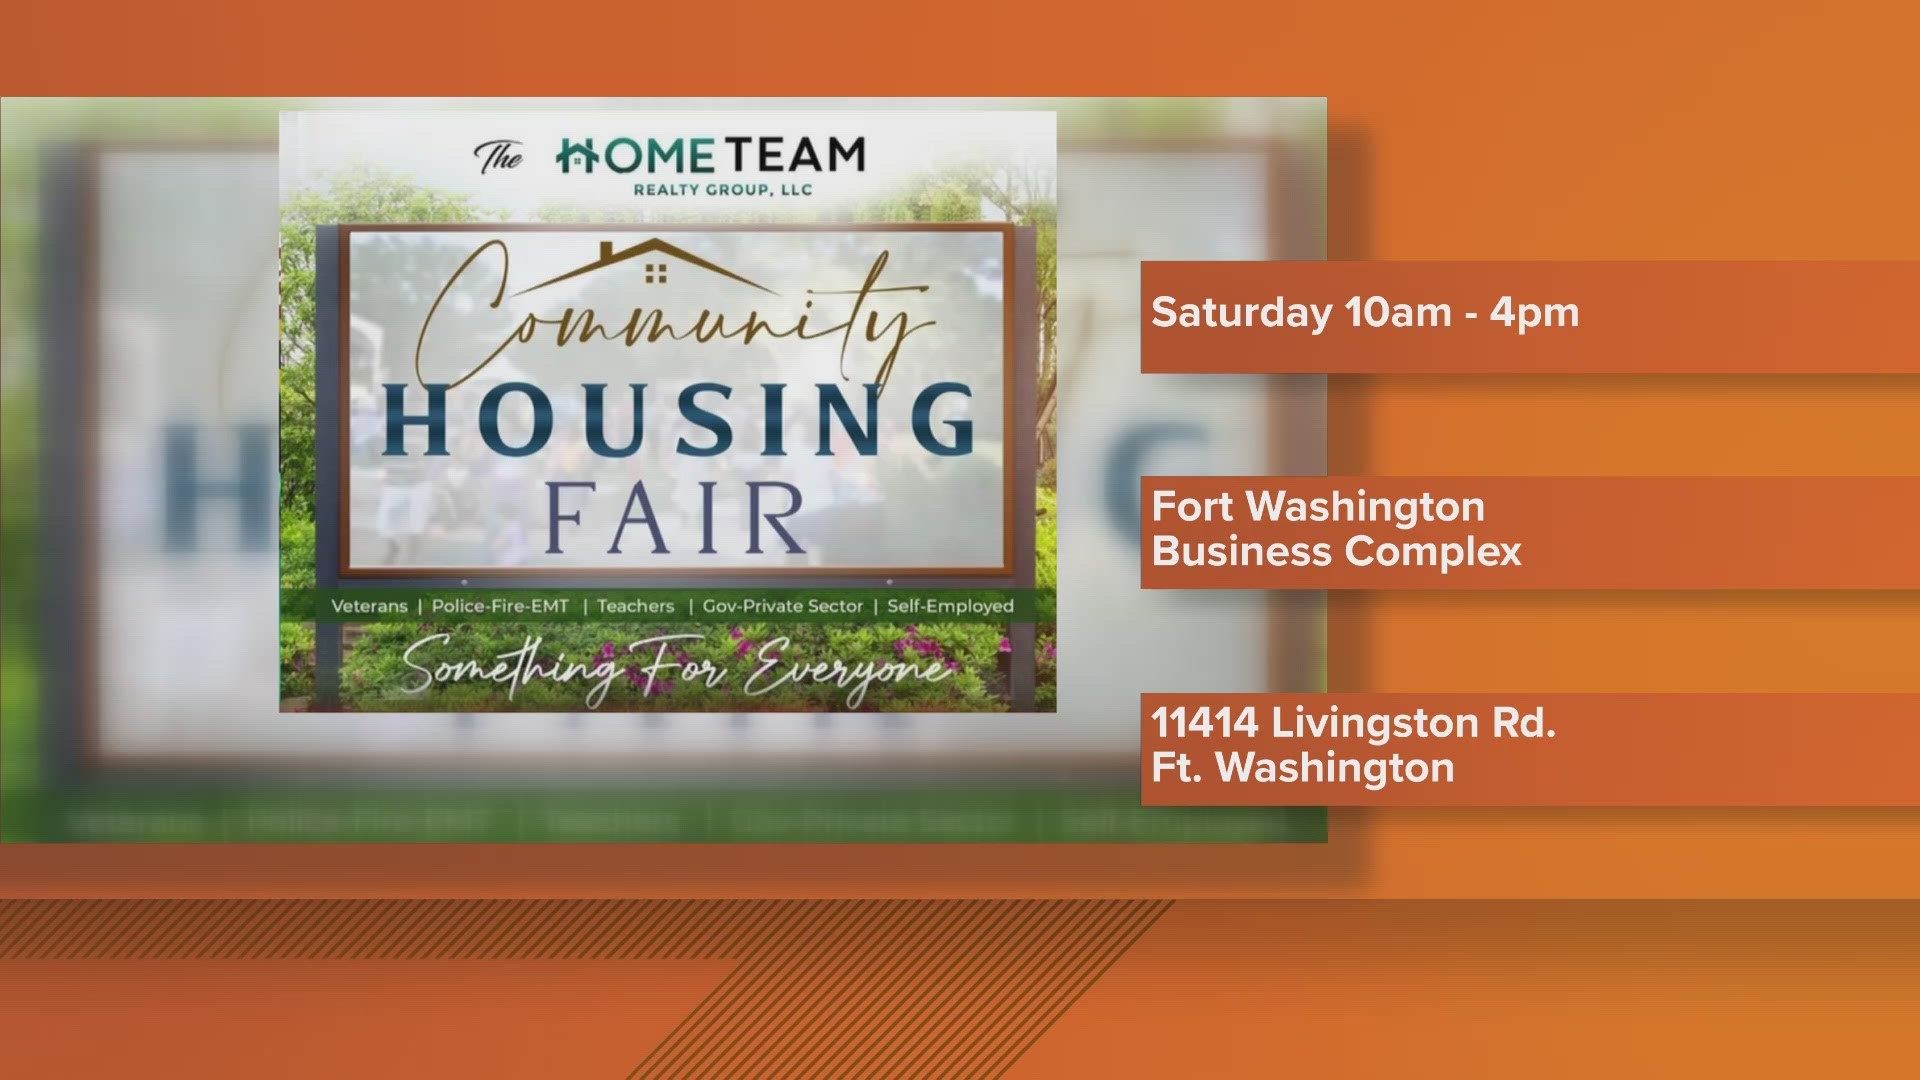 The free community housing fair takes place Saturday in Ft. Washington.